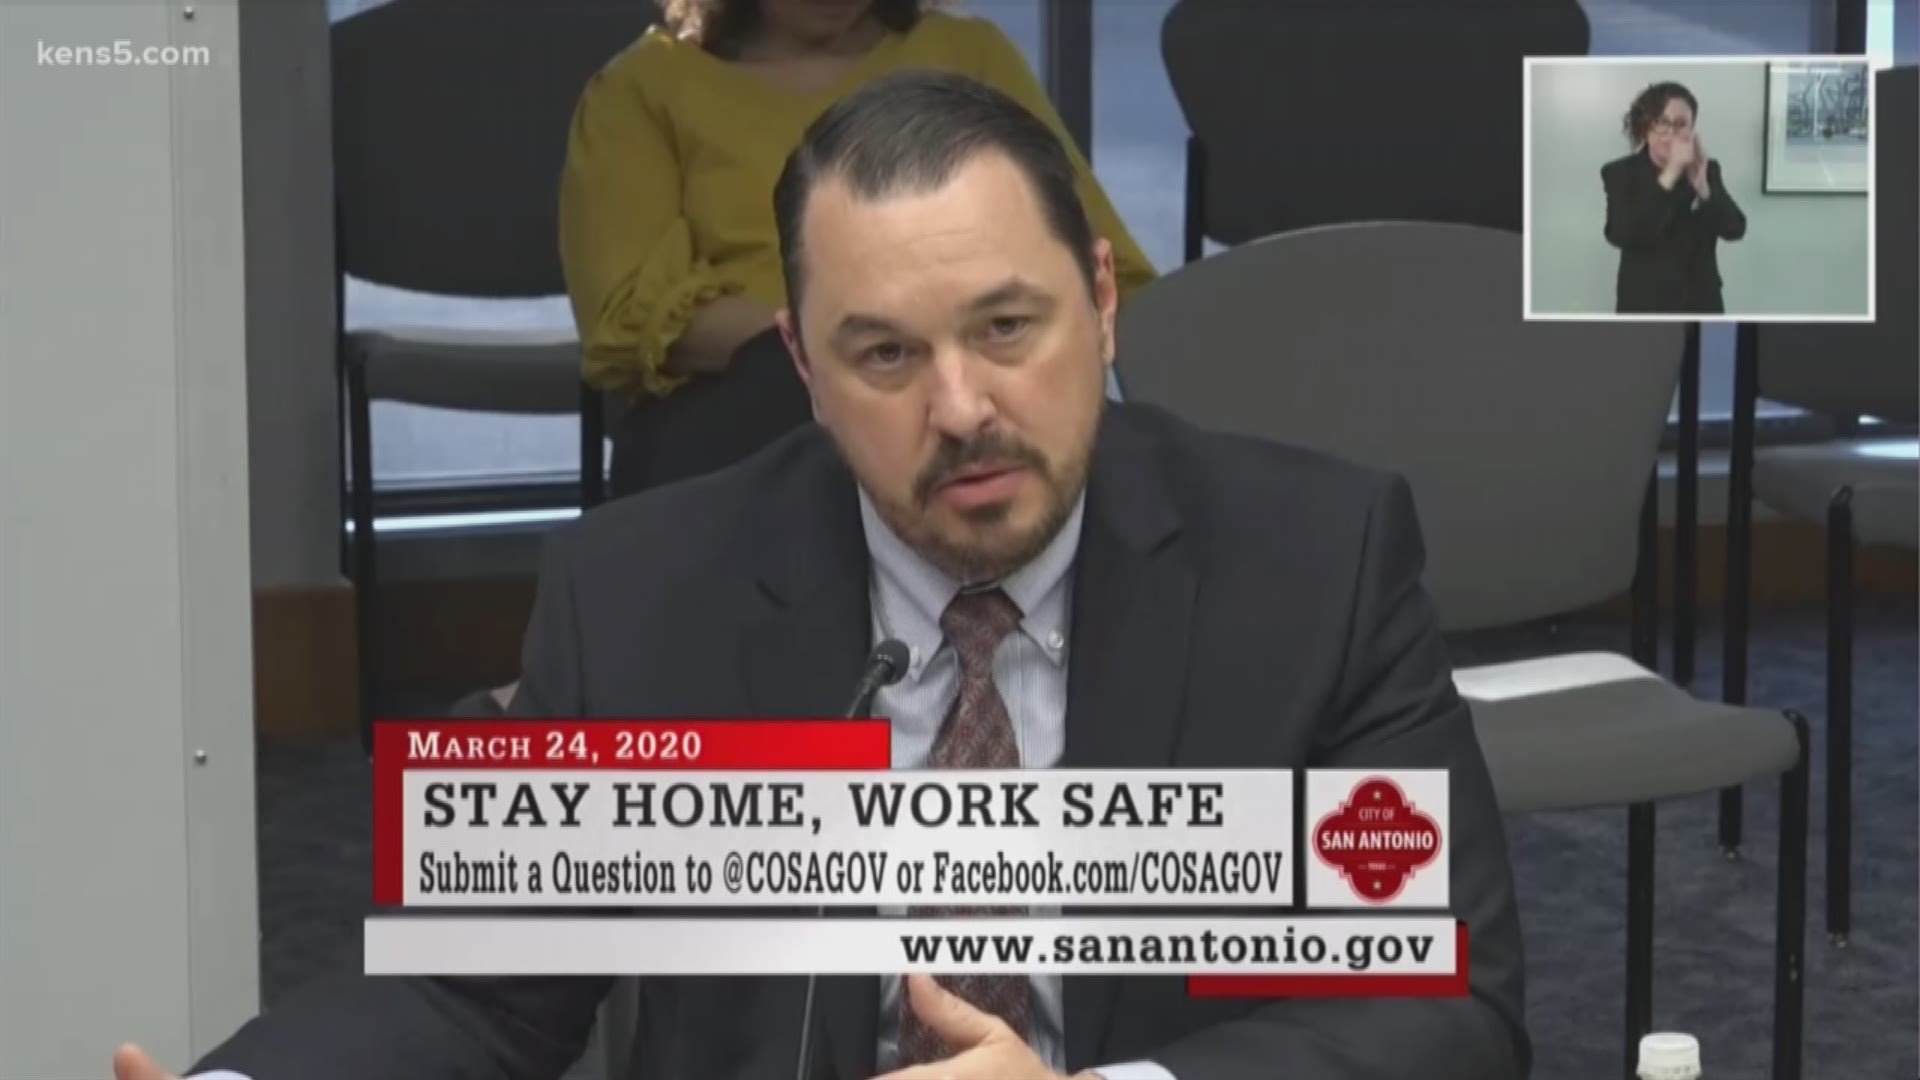 City leaders explain what is allowed under the mayor's 'Stay Home, Work Safe' order.